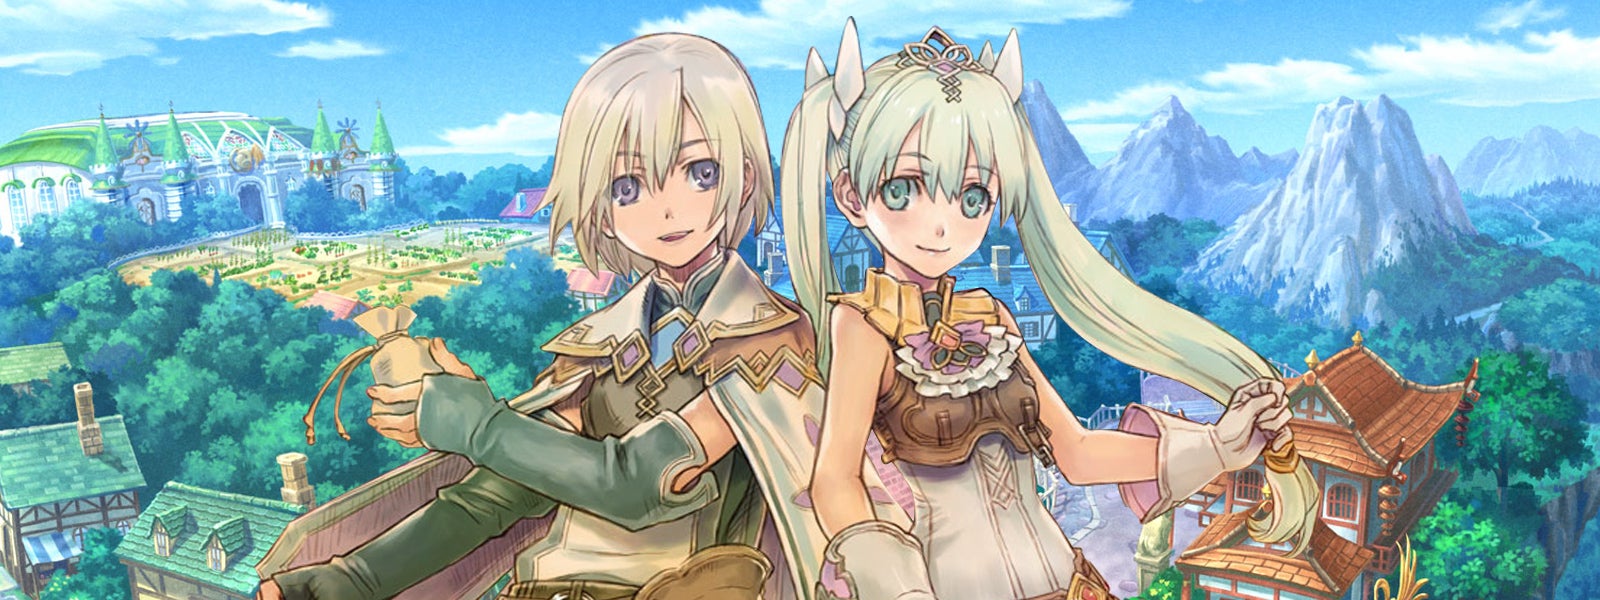 Image for Rune Factory 4 has shipped a combined 200,000 digital and physical copies in Japan